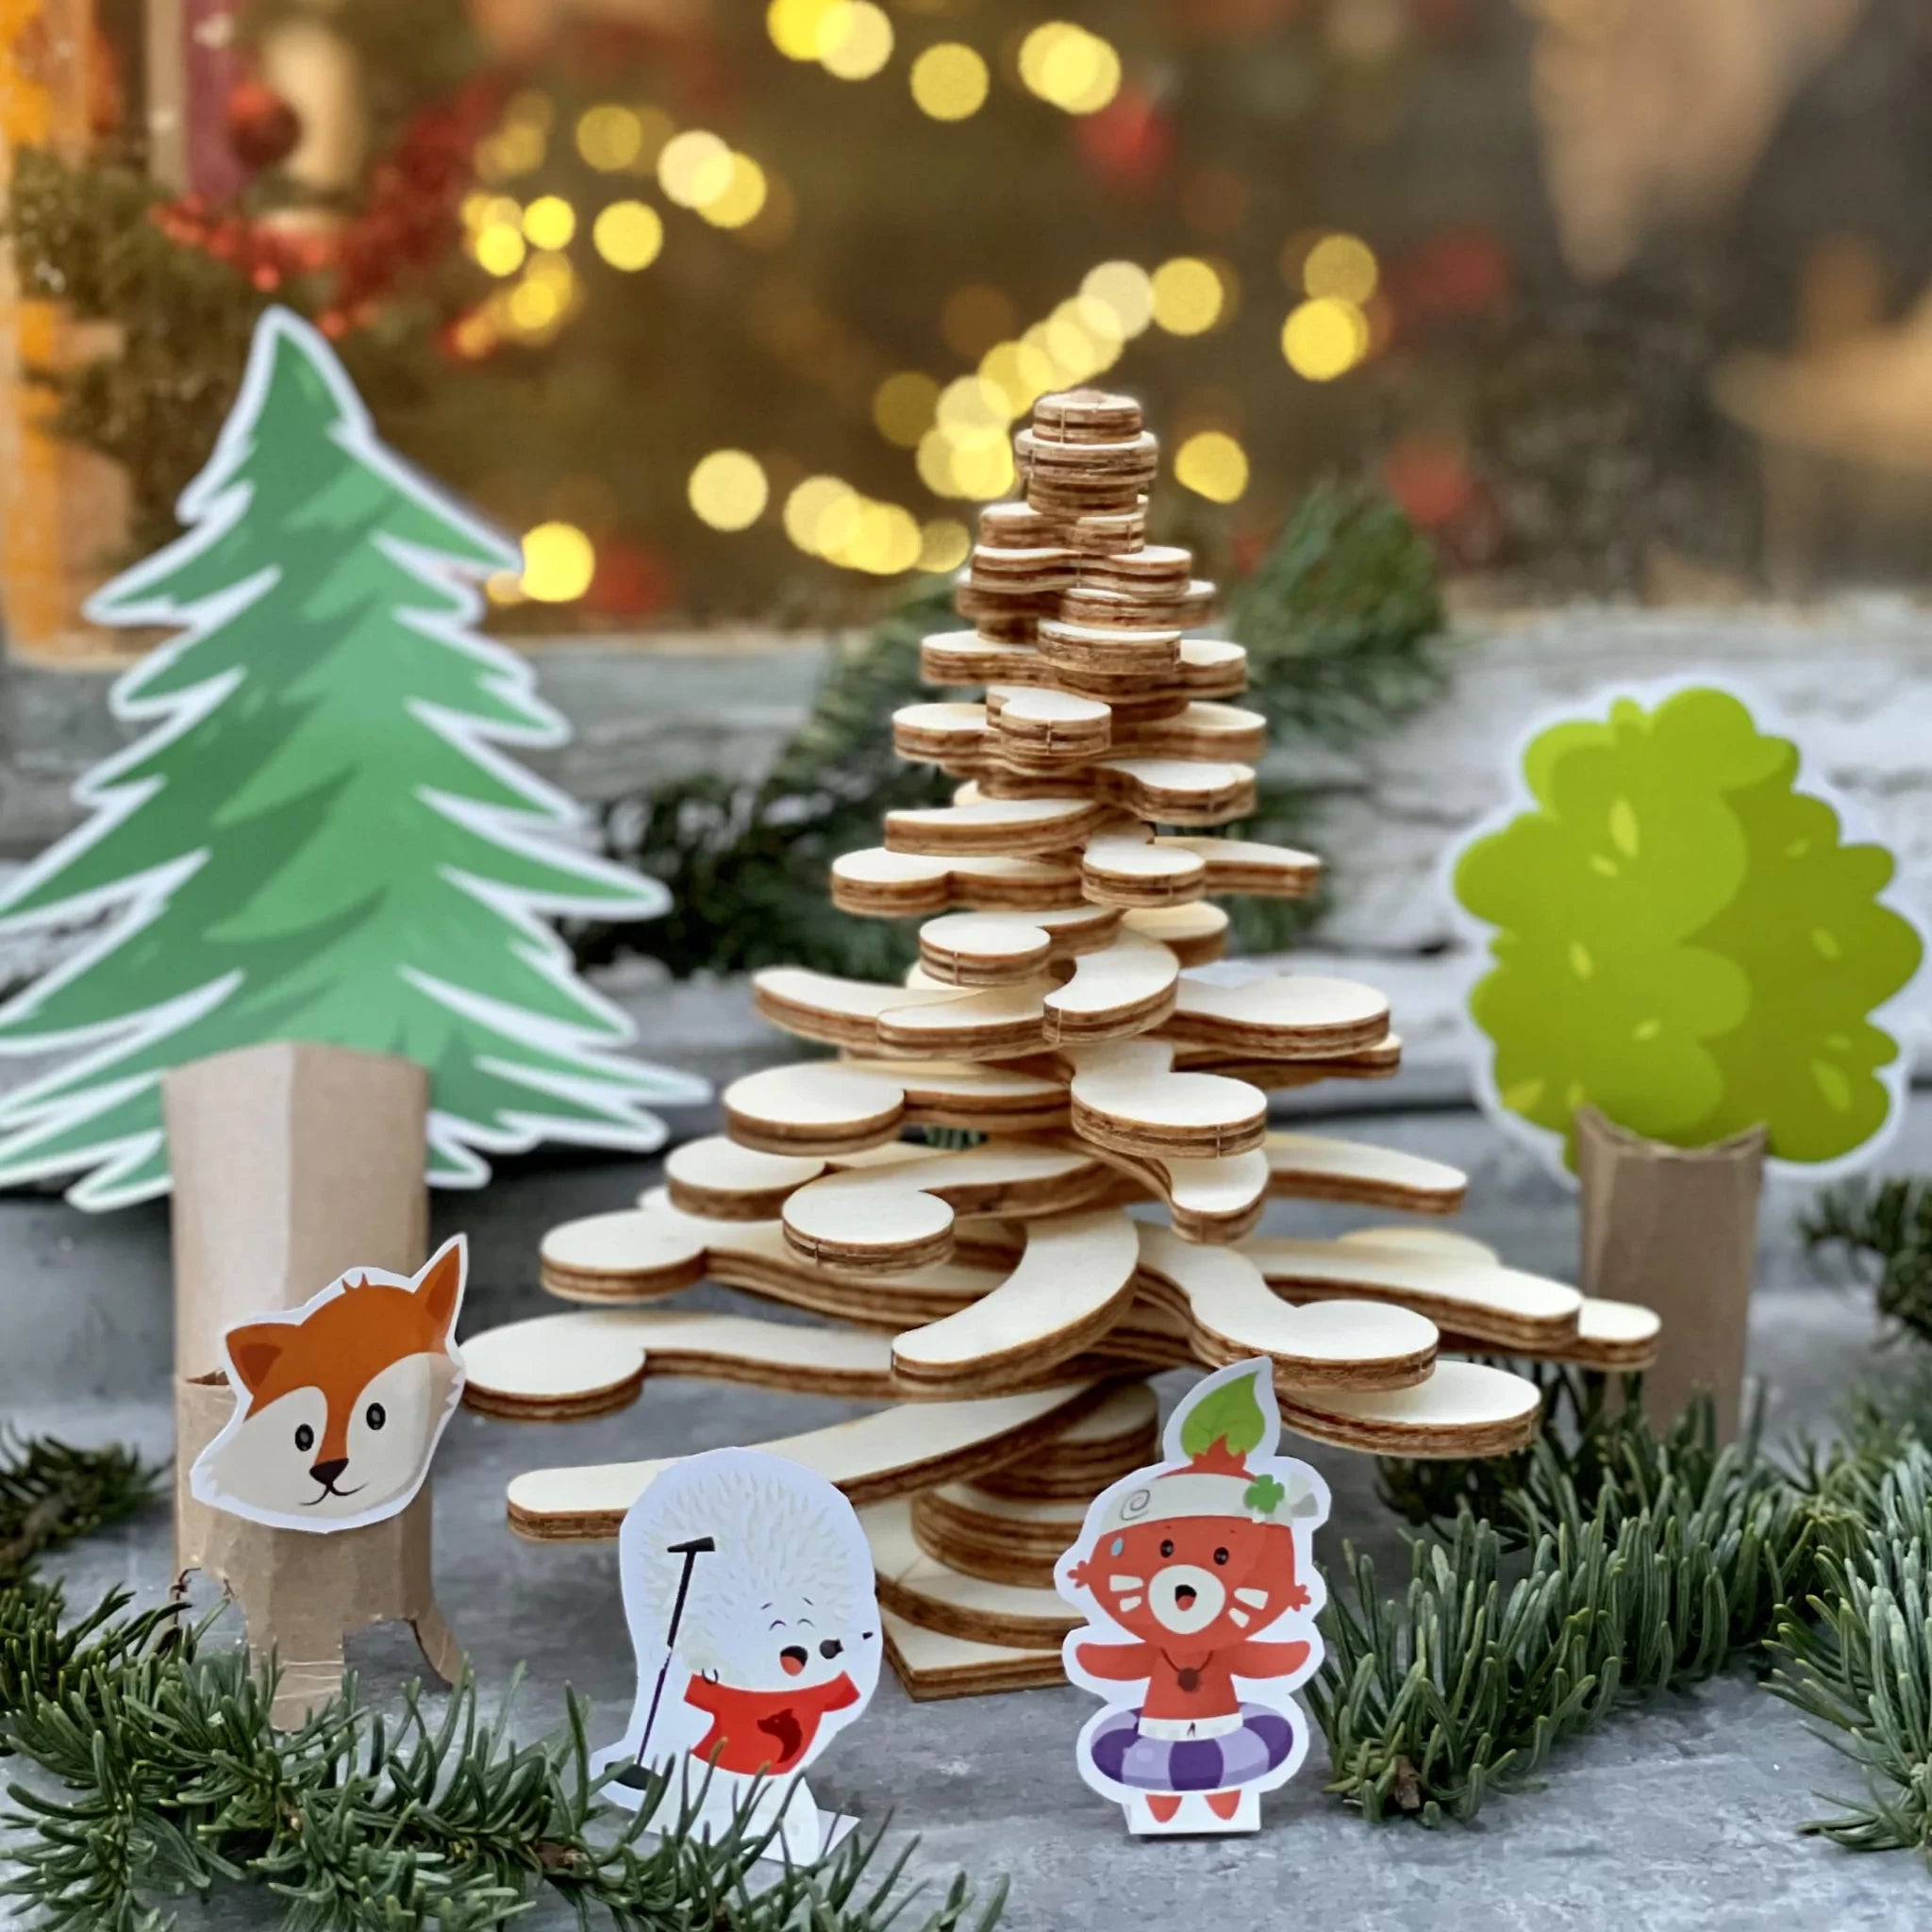 The forest kit: make your Christmas tree - Made in France - Botaki